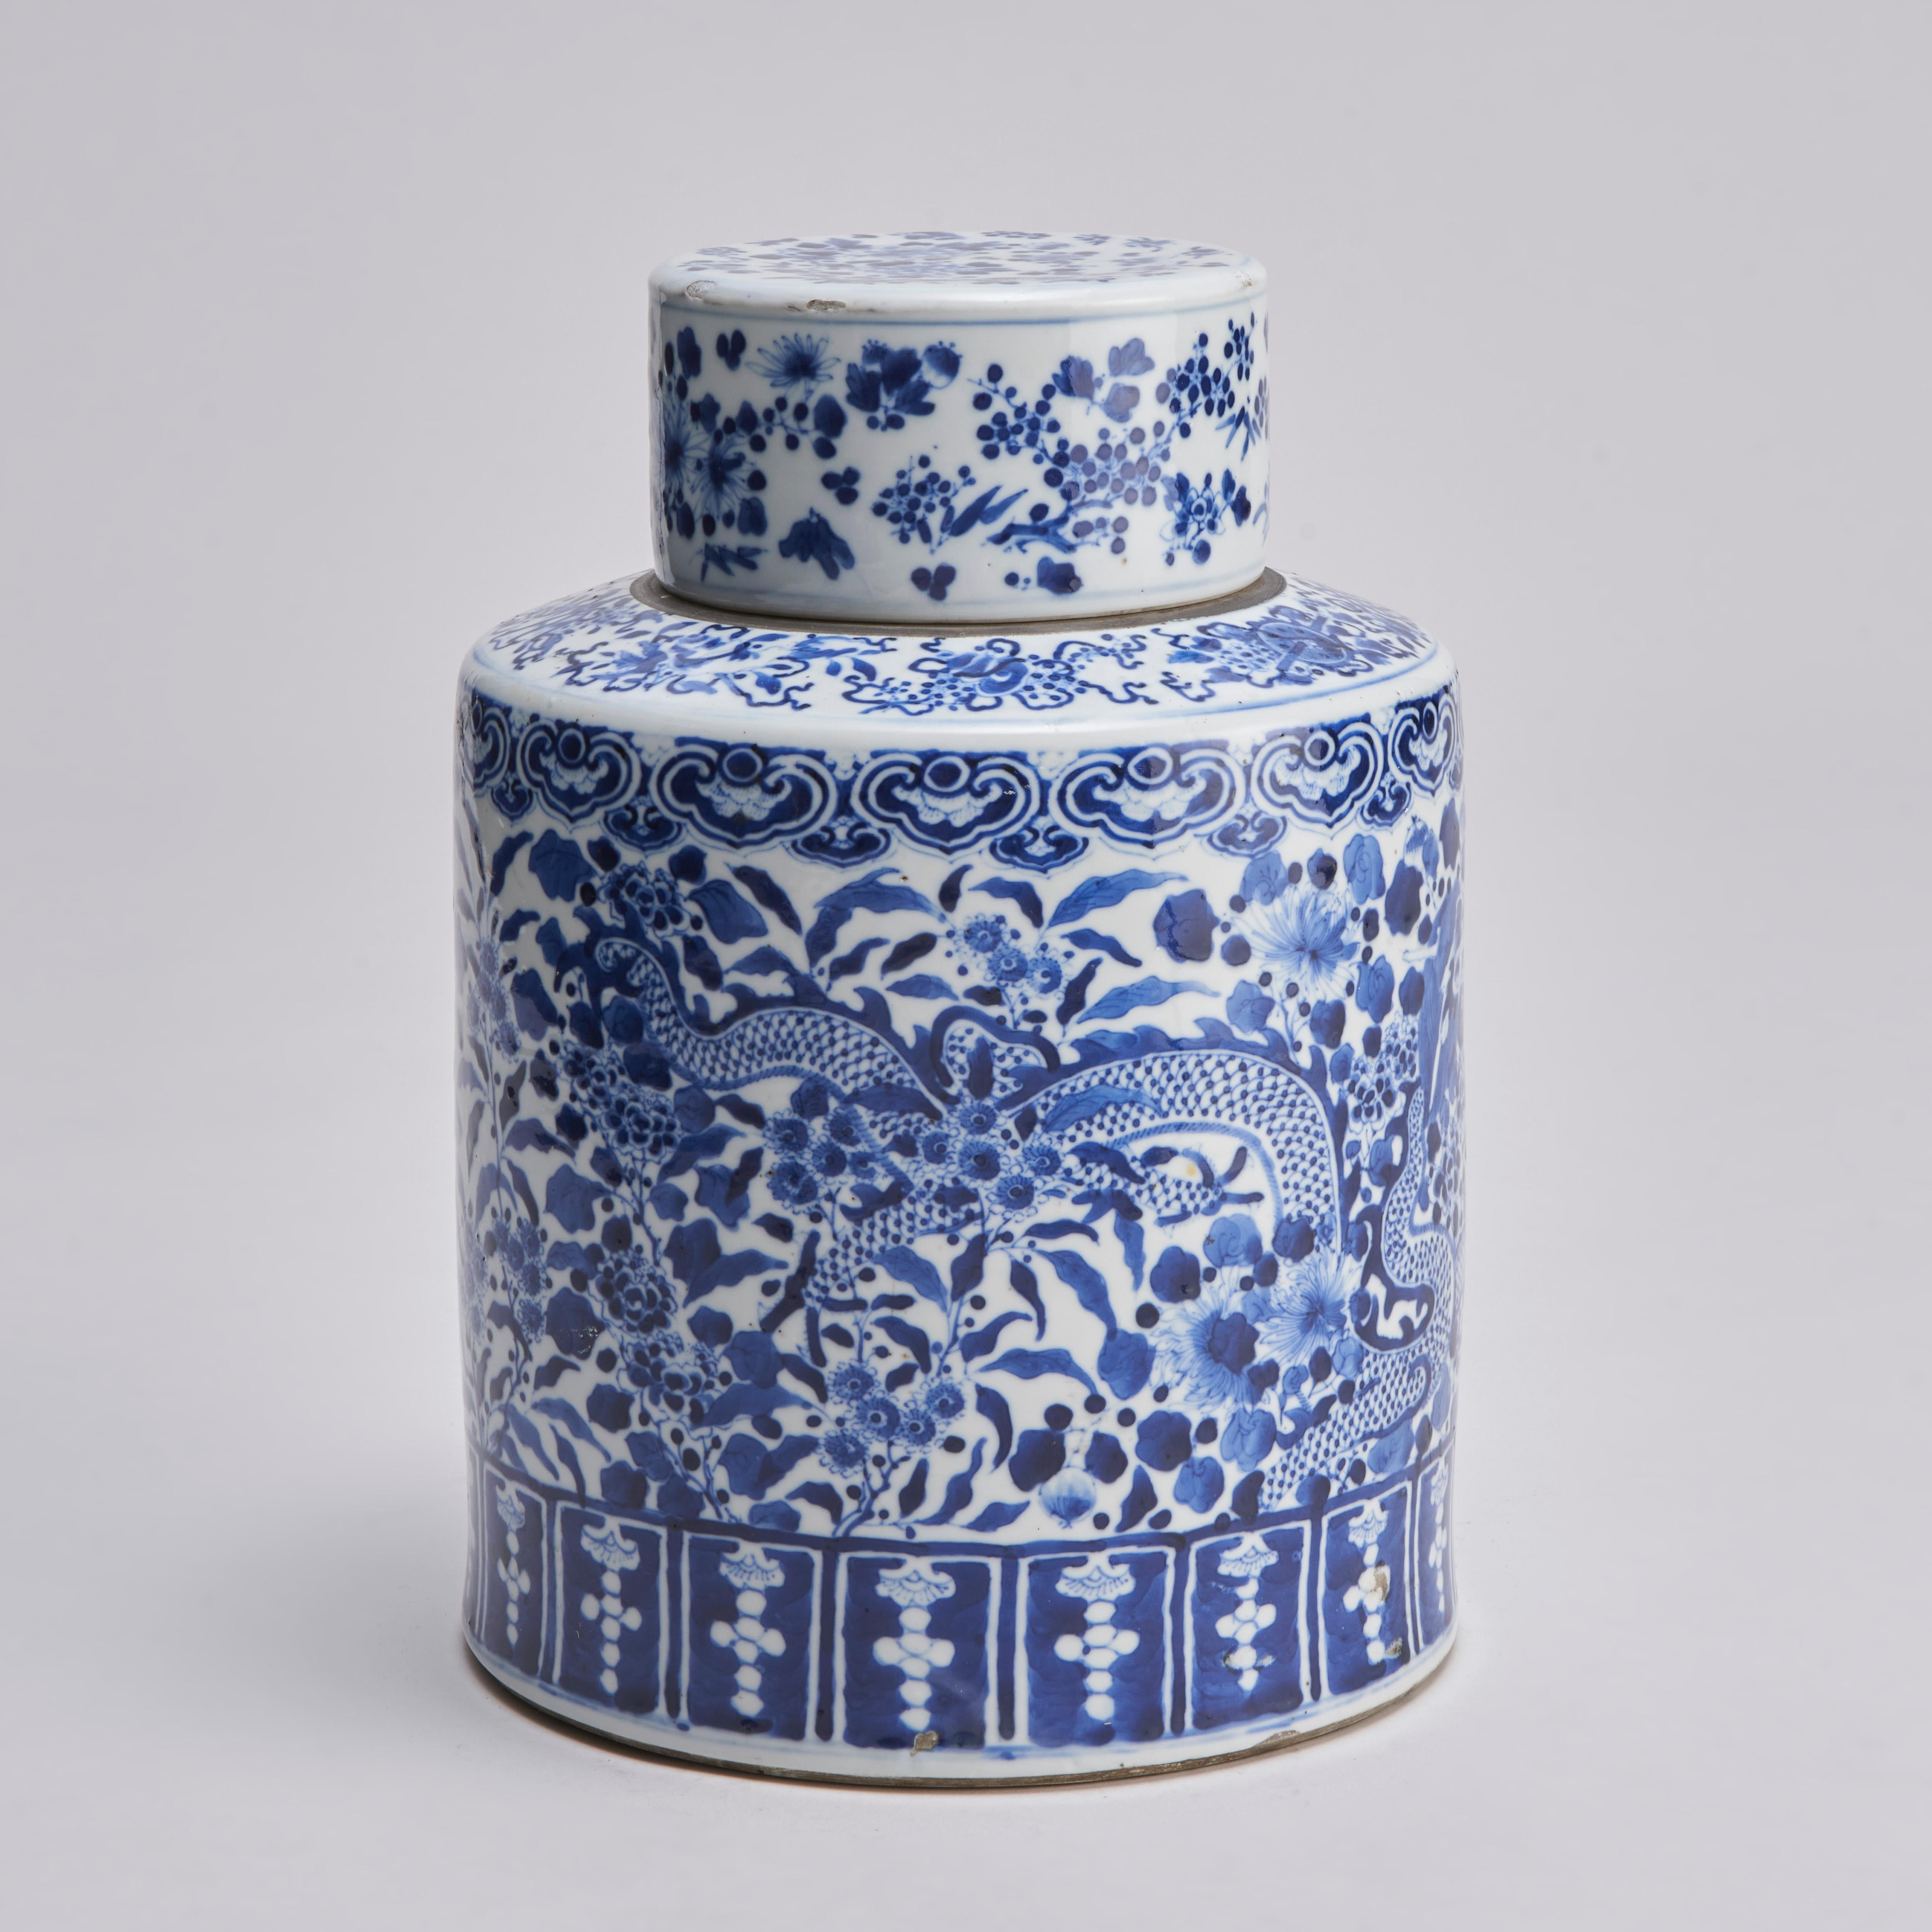 From our collection of antique Oriental porcelain this 19th century Chinese blue and white cannister with decorations of dragons on a floral and foliate ground with Ruyi borders and matched lid.

Contact us for additional images or to arrange a